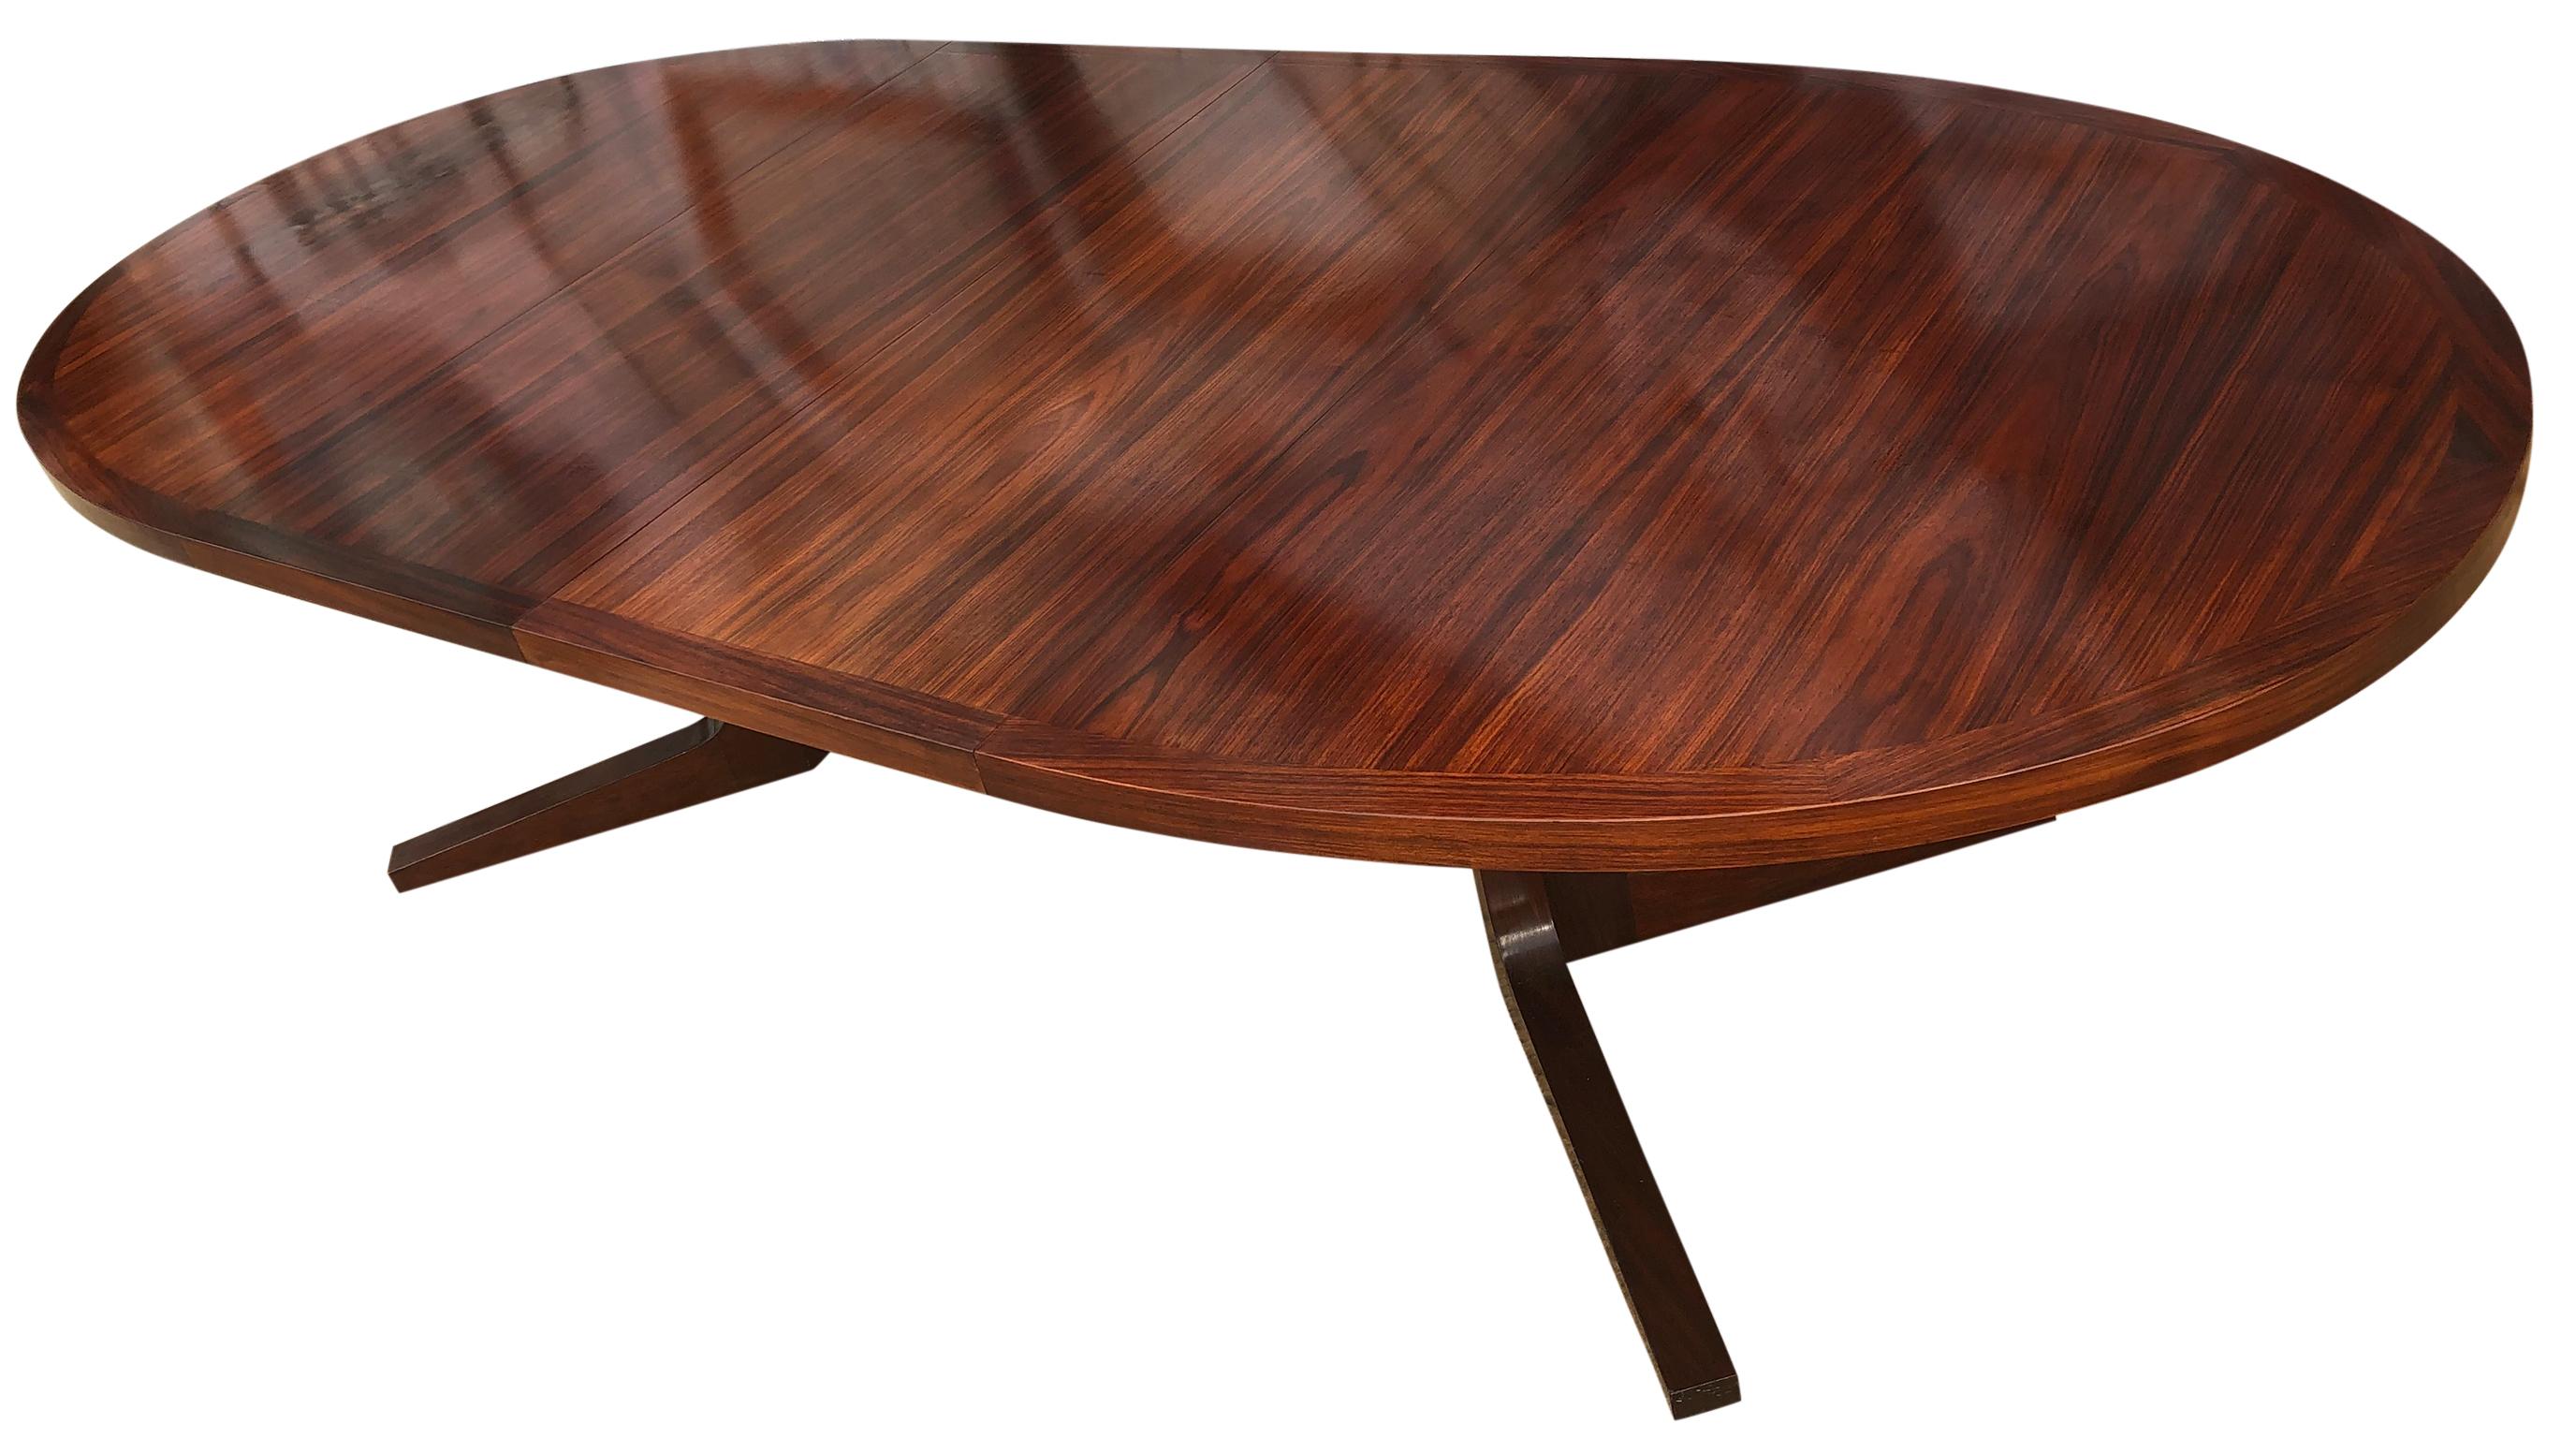 20th Century Midcentury Elliptical Danish Rosewood Expandable Dining Table '2' Leaves